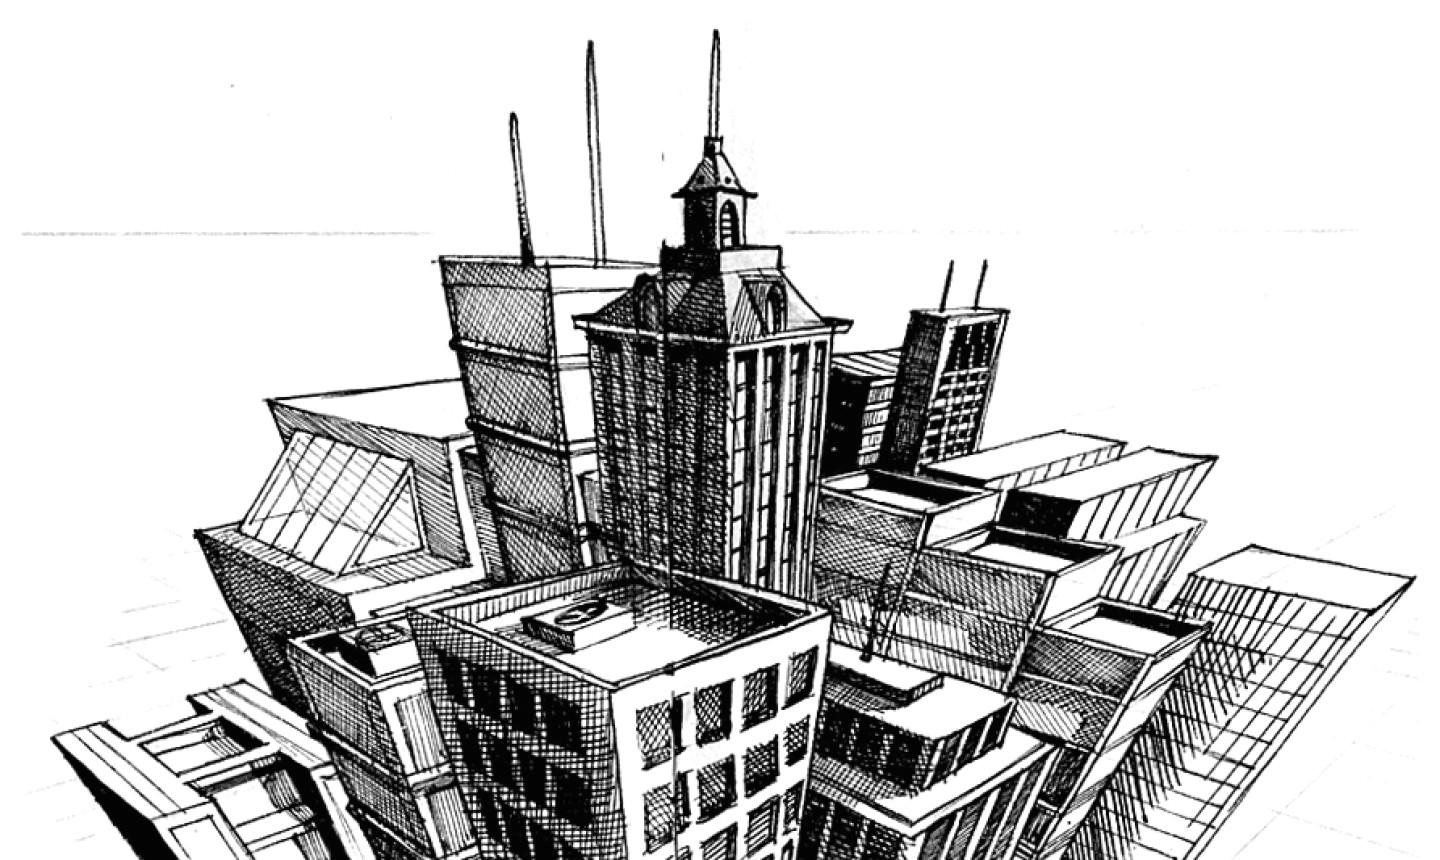 2 Point Perspective Drawings Easy A Step by Step Tutorial On the Basics Of Three Point Perspective